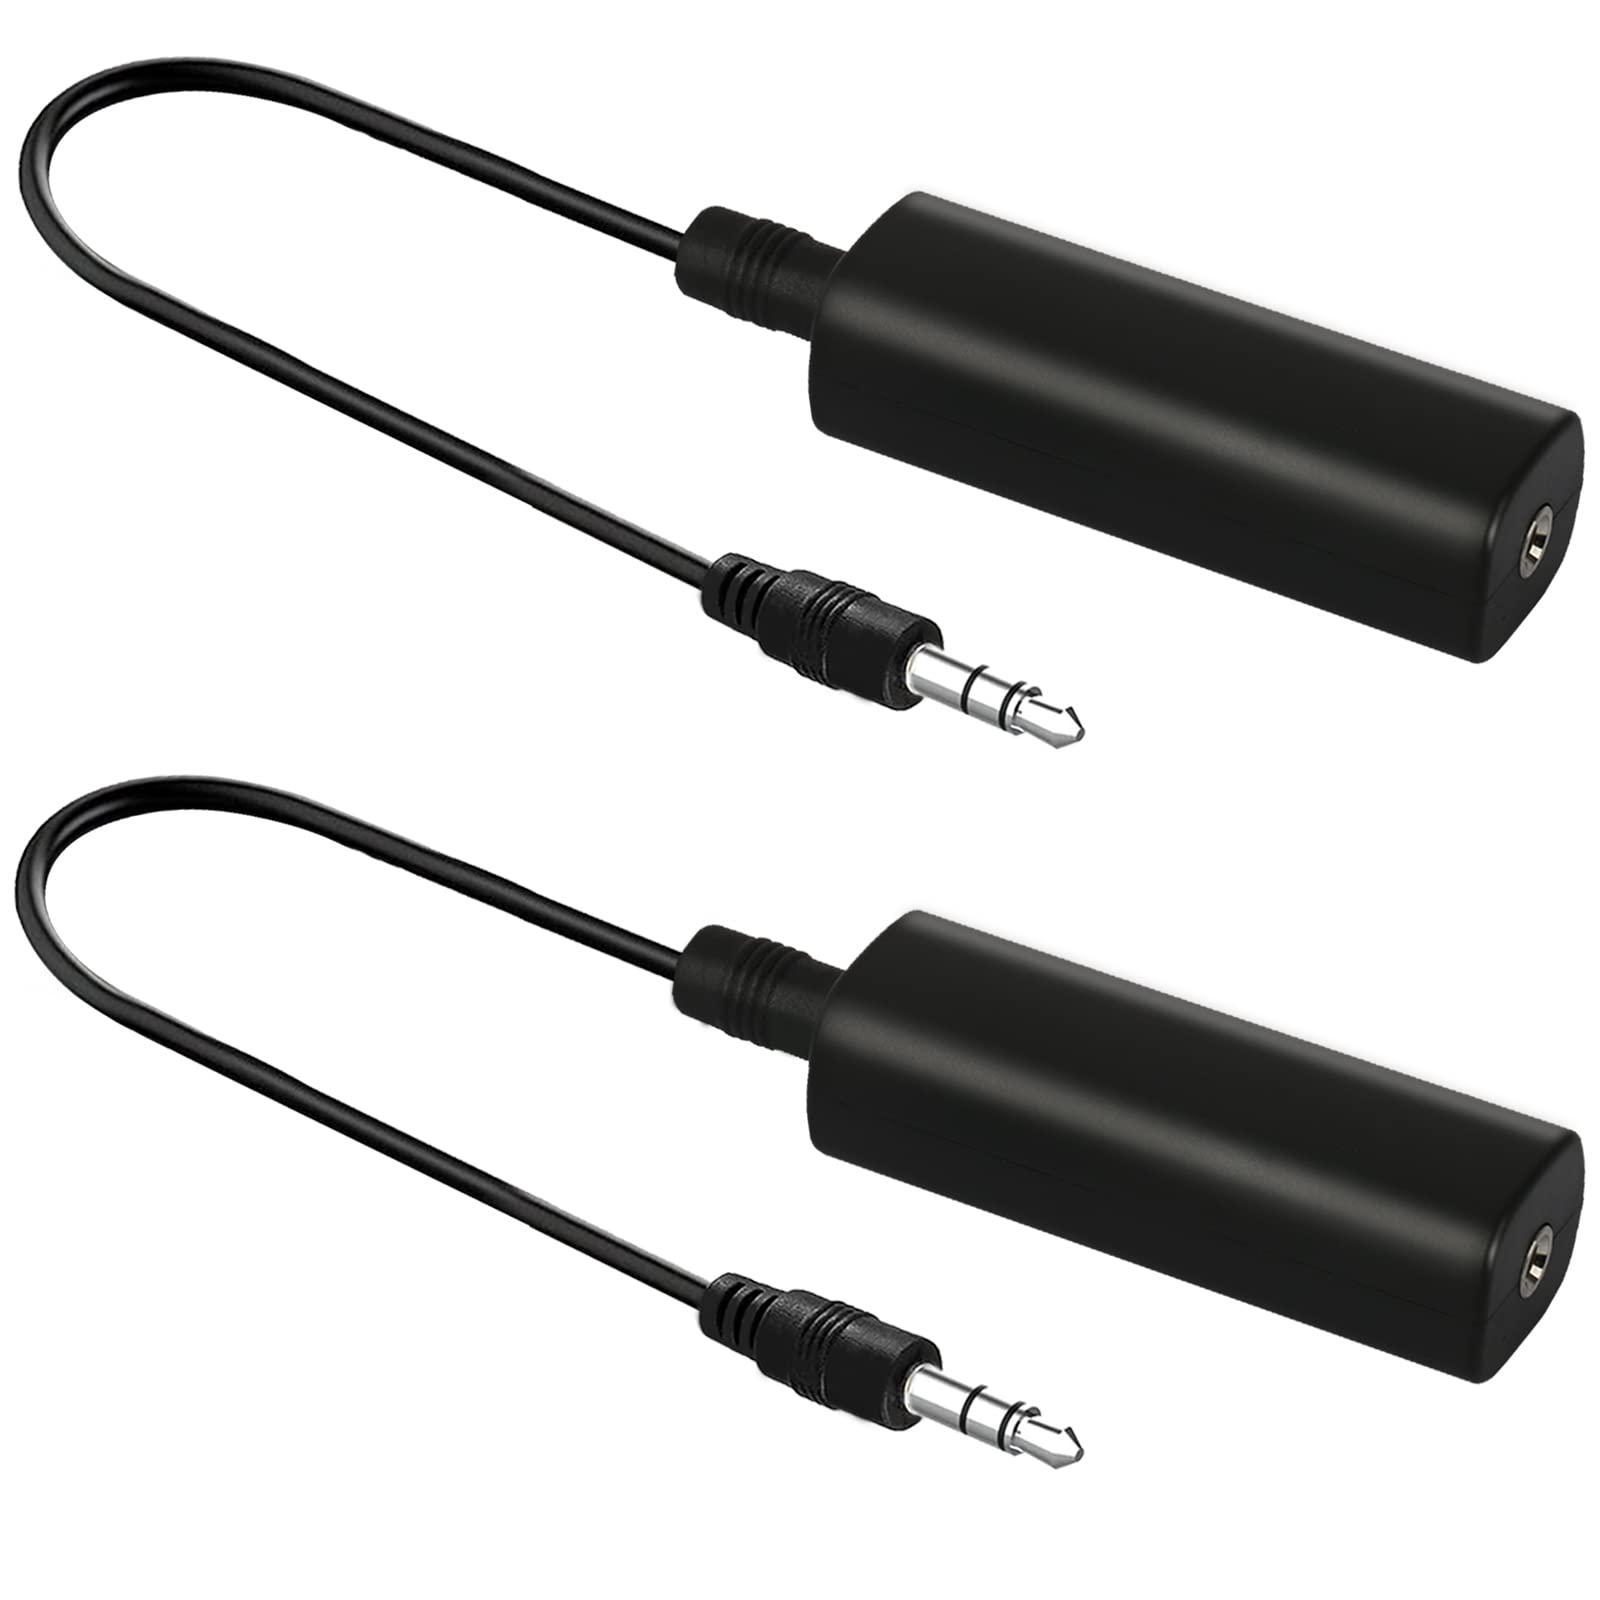 Purchase a ground loop isolator from an electronics store.
Connect the ground loop isolator between your PC and audio output device.